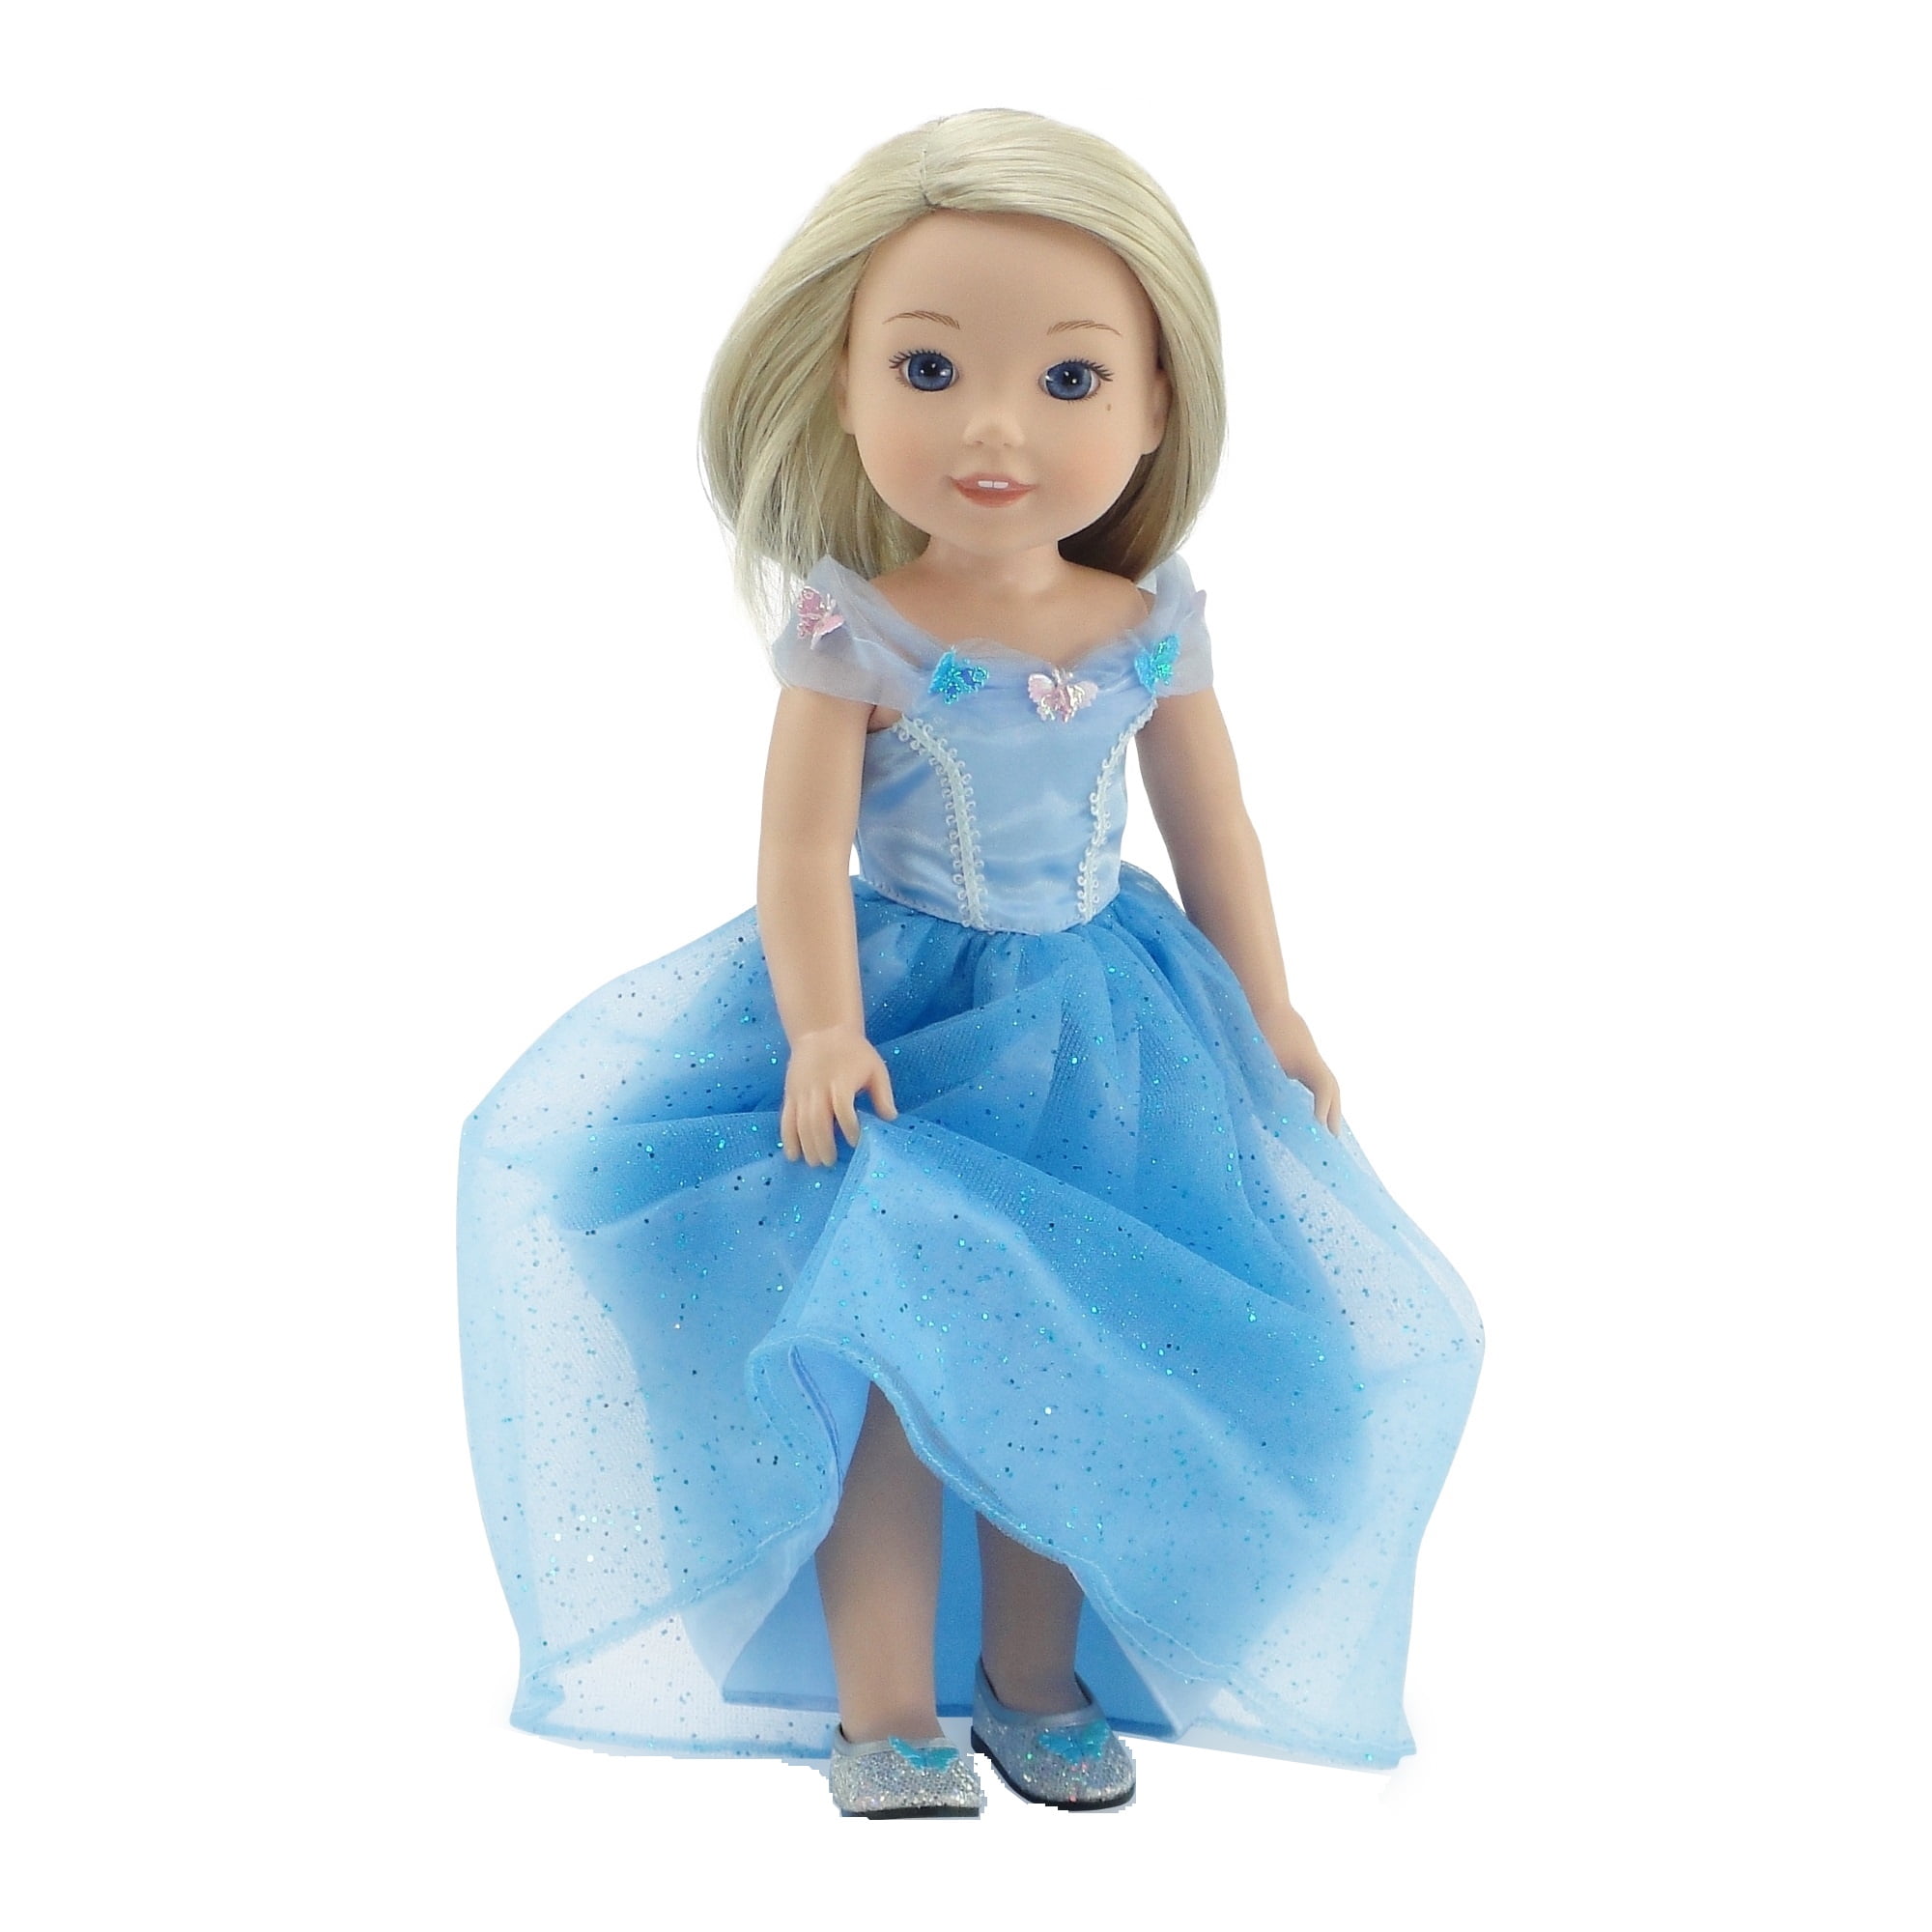 Fashion casual princess doll clothes to wear  doll clothes toy doll_TIha 